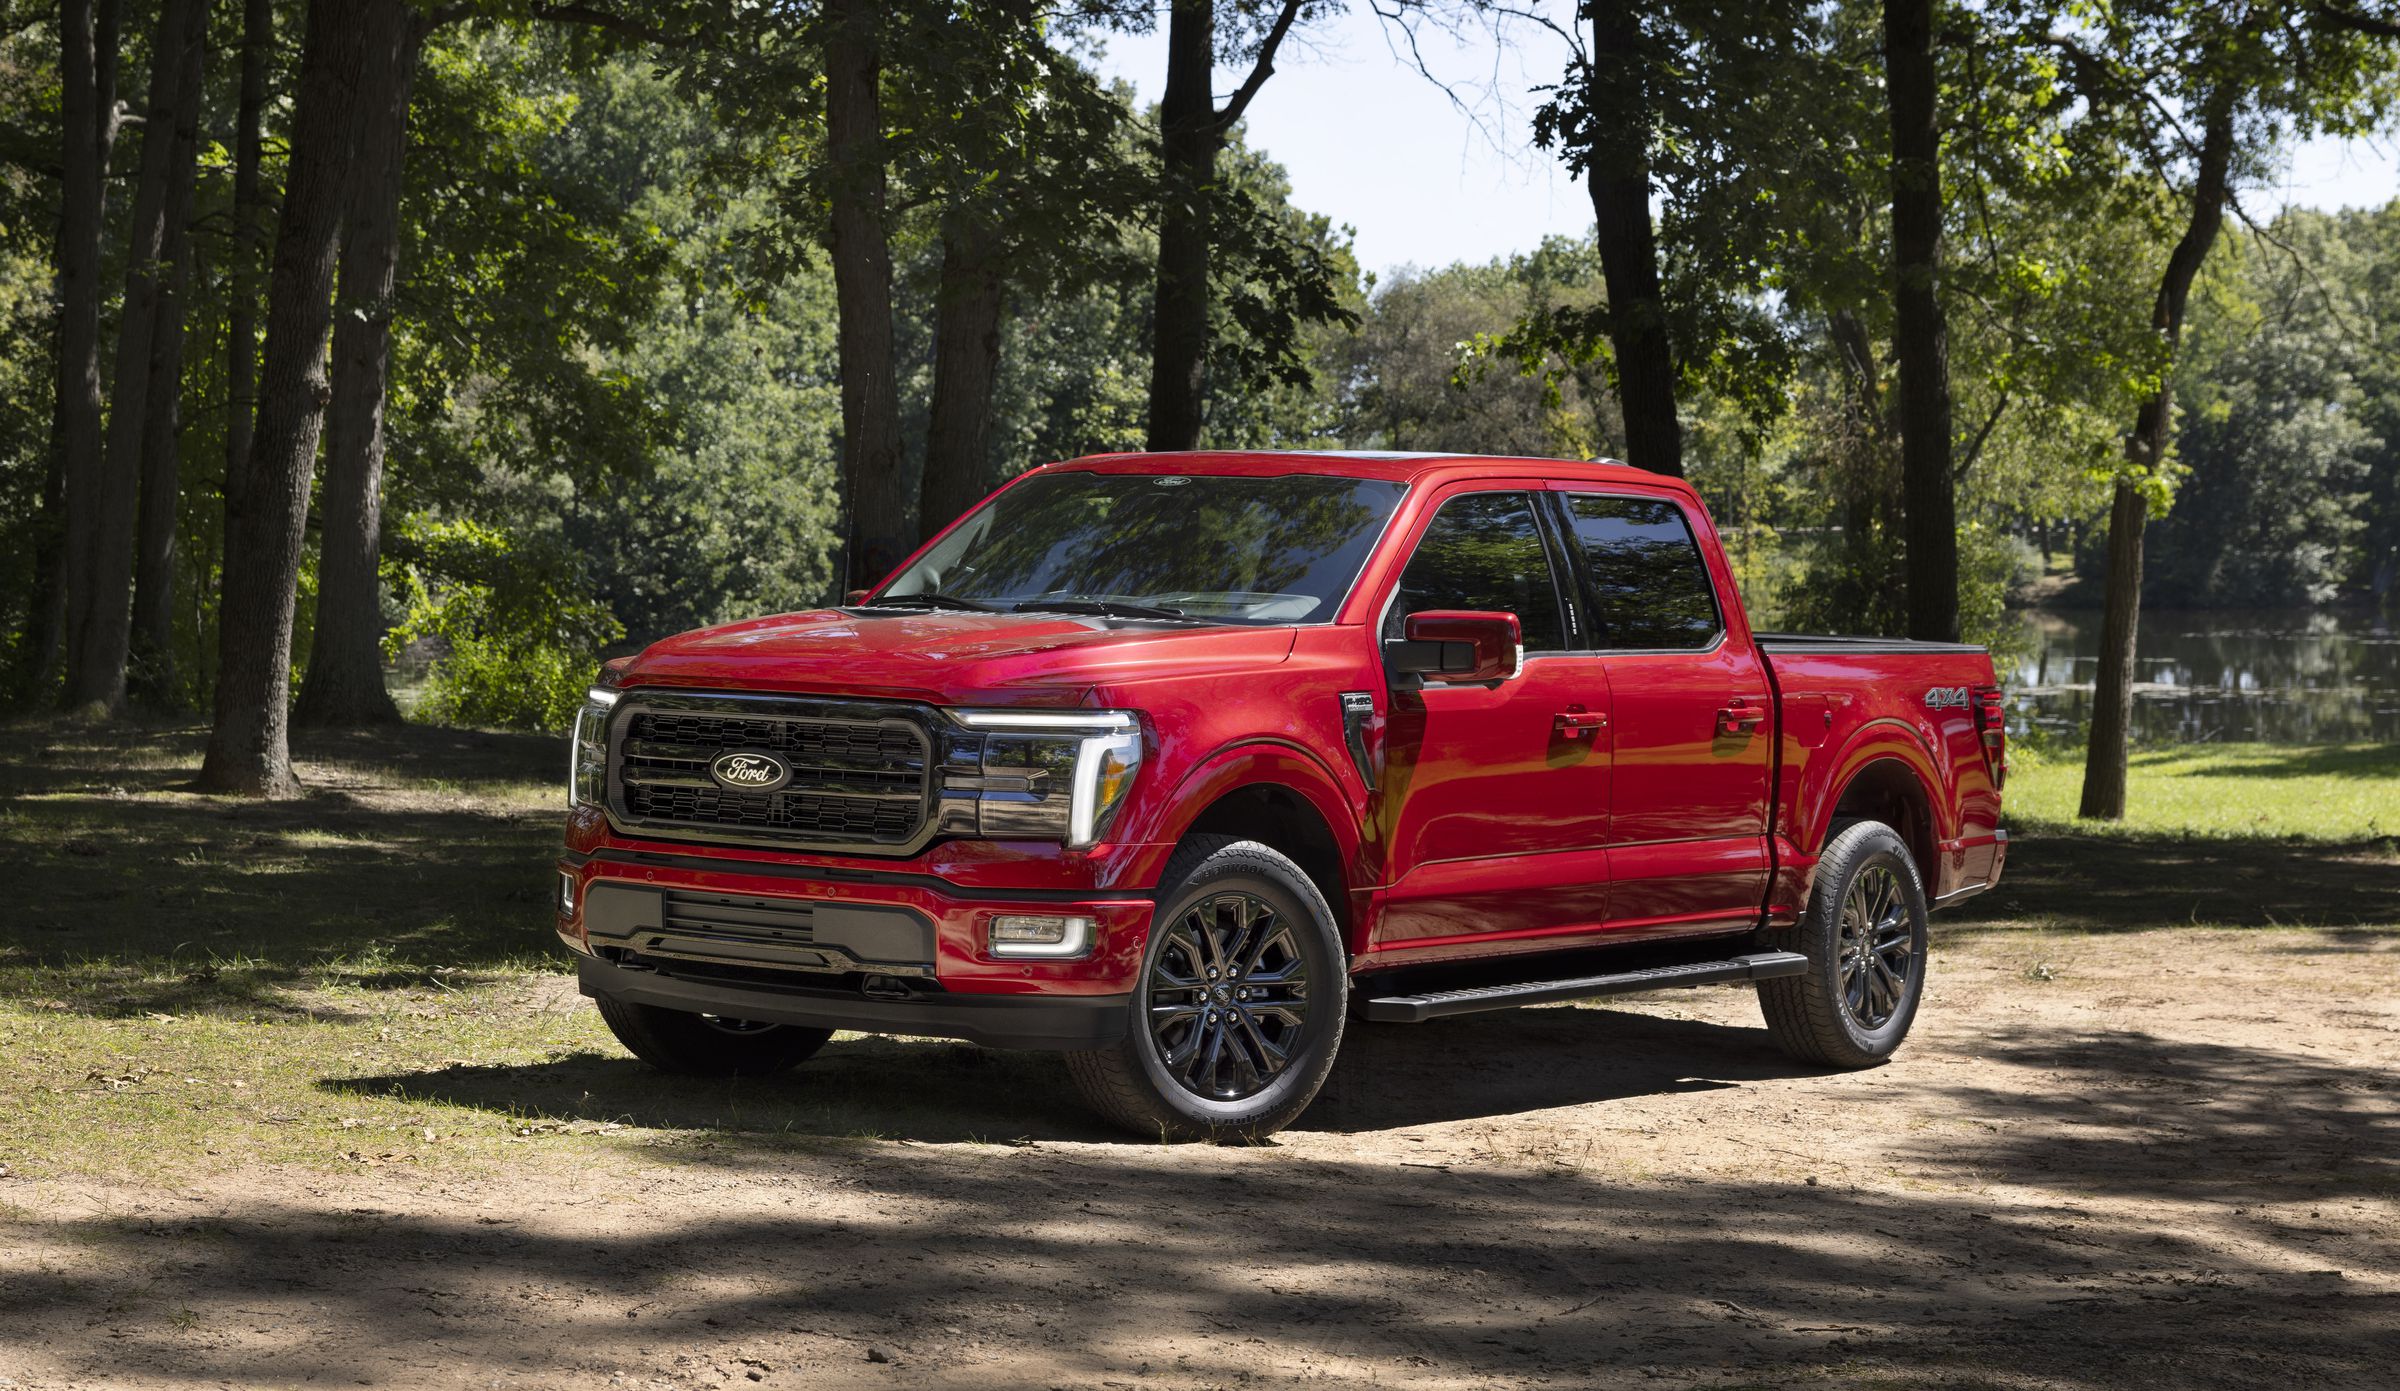 The F-150 Lariat is a pretty truck with the right amount of daytime running LEDs.